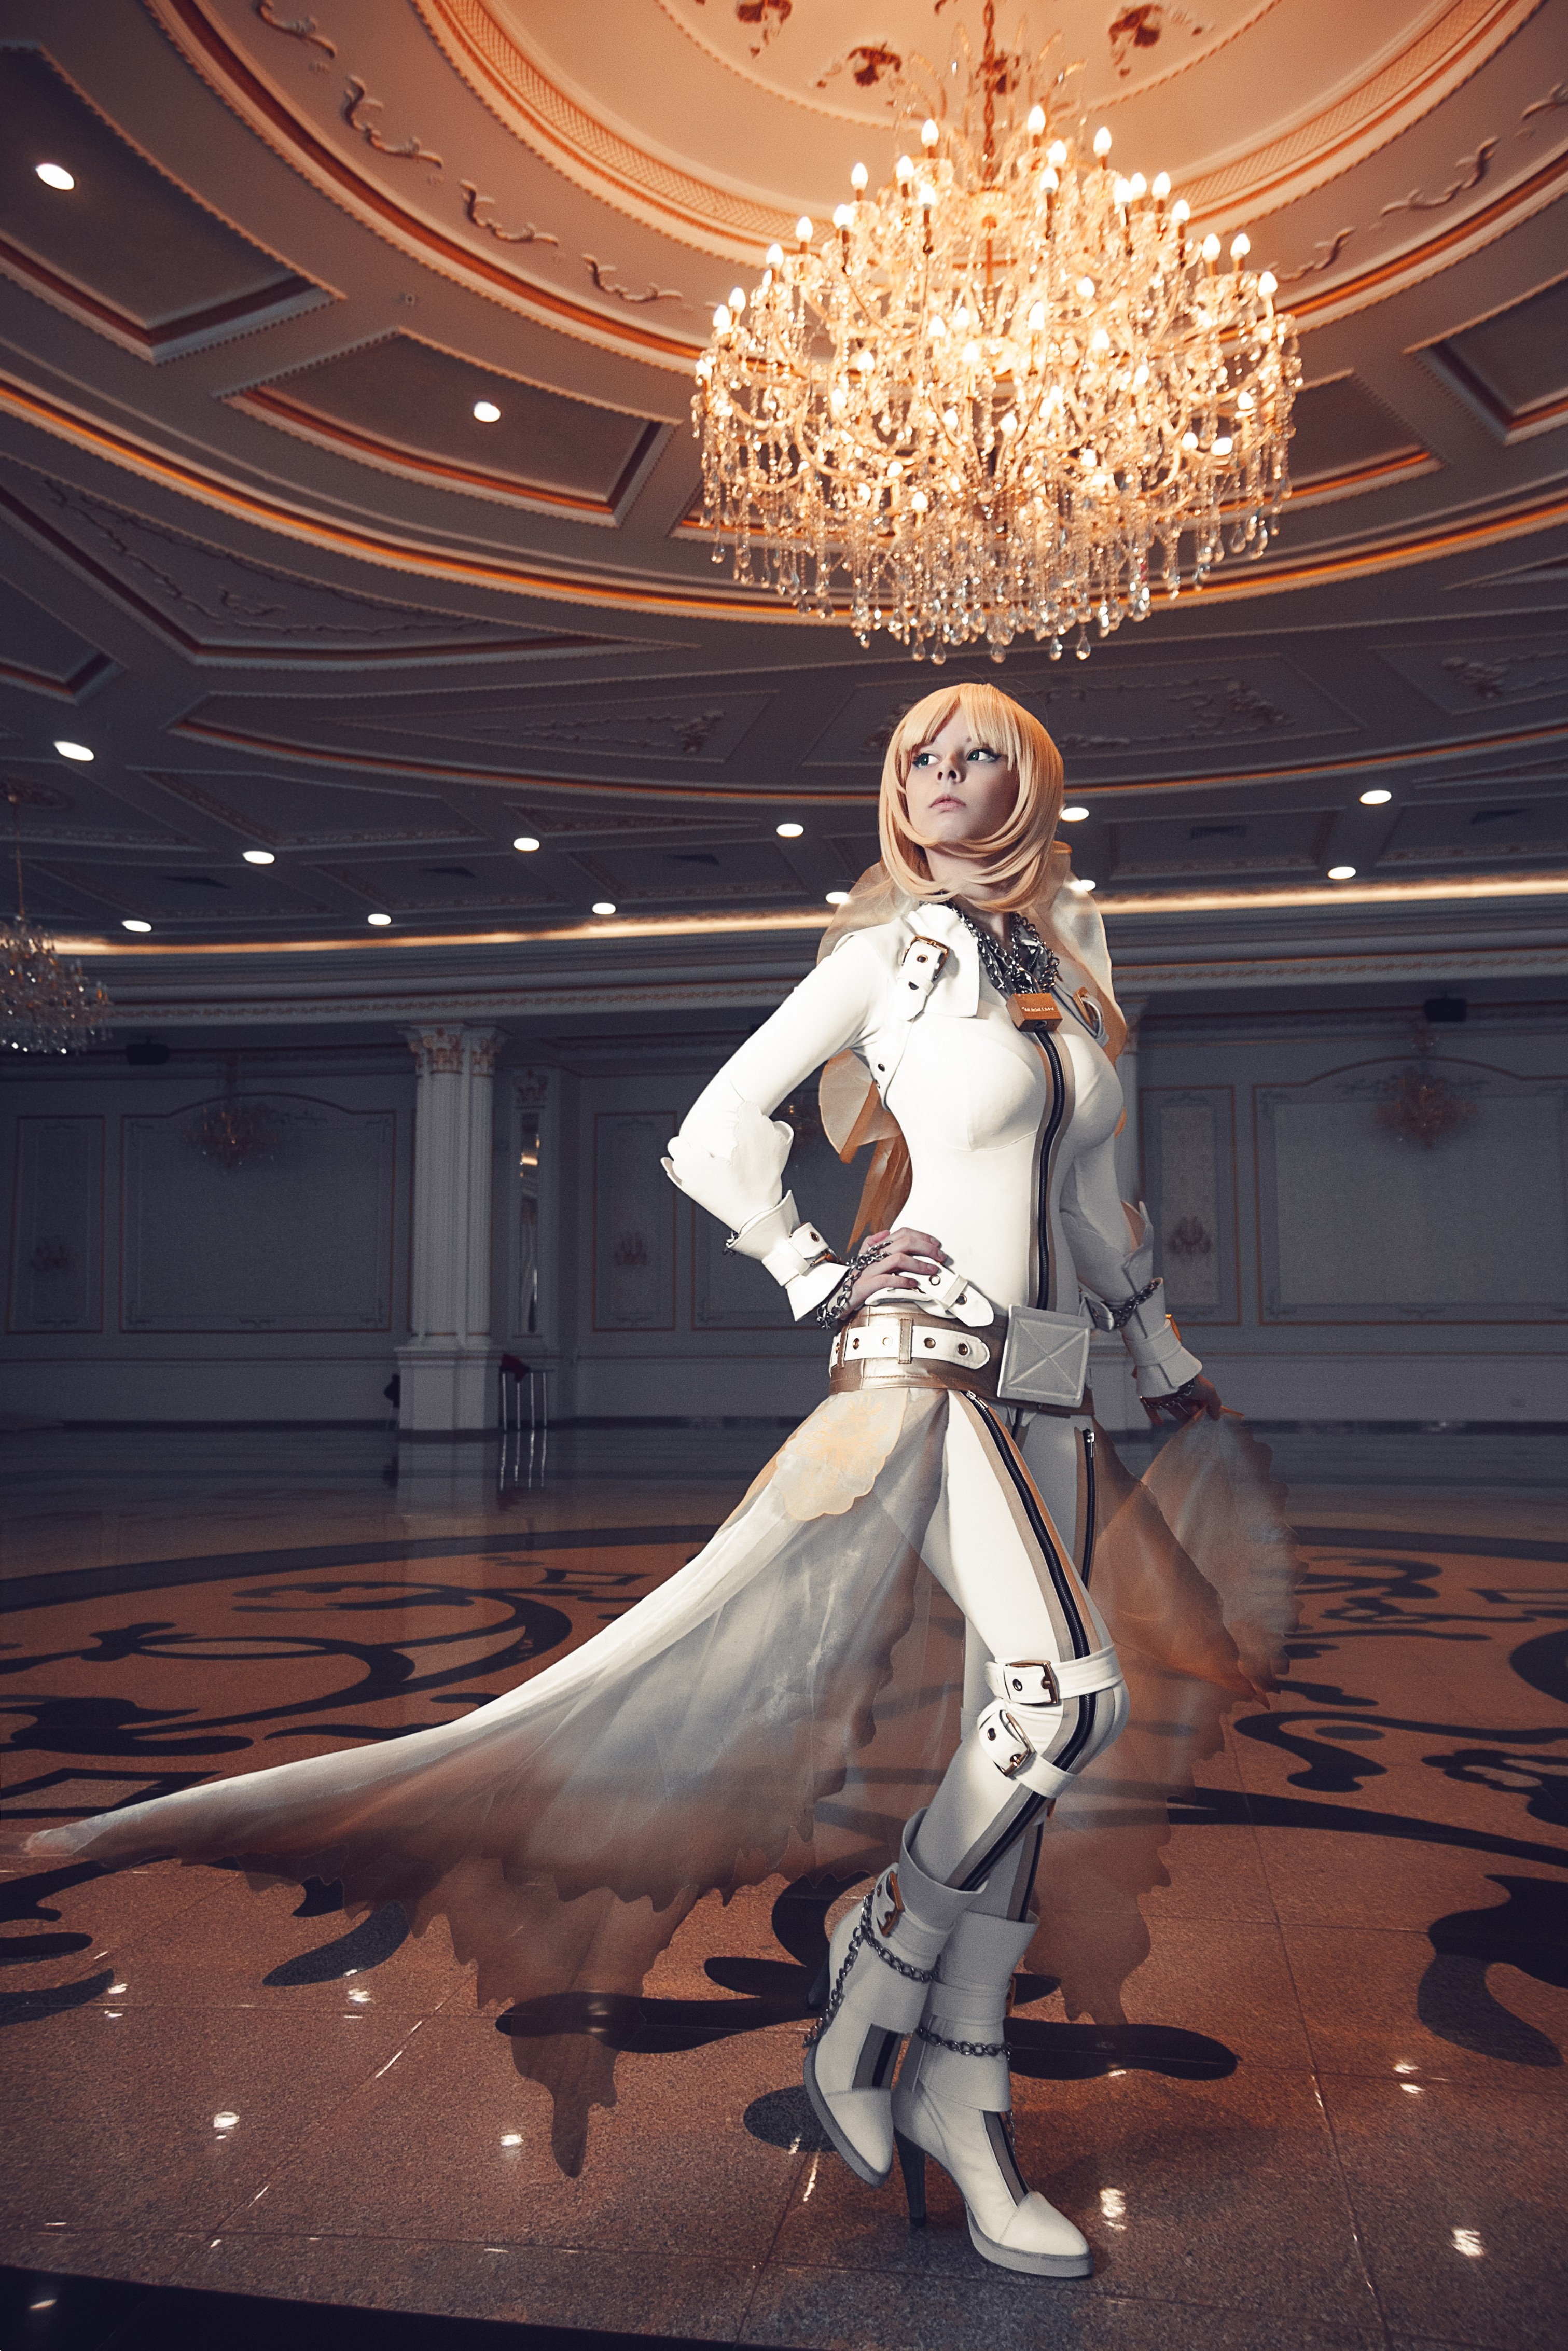 cosplay wallpaper hd,fashion,dress,gown,wedding dress,haute couture